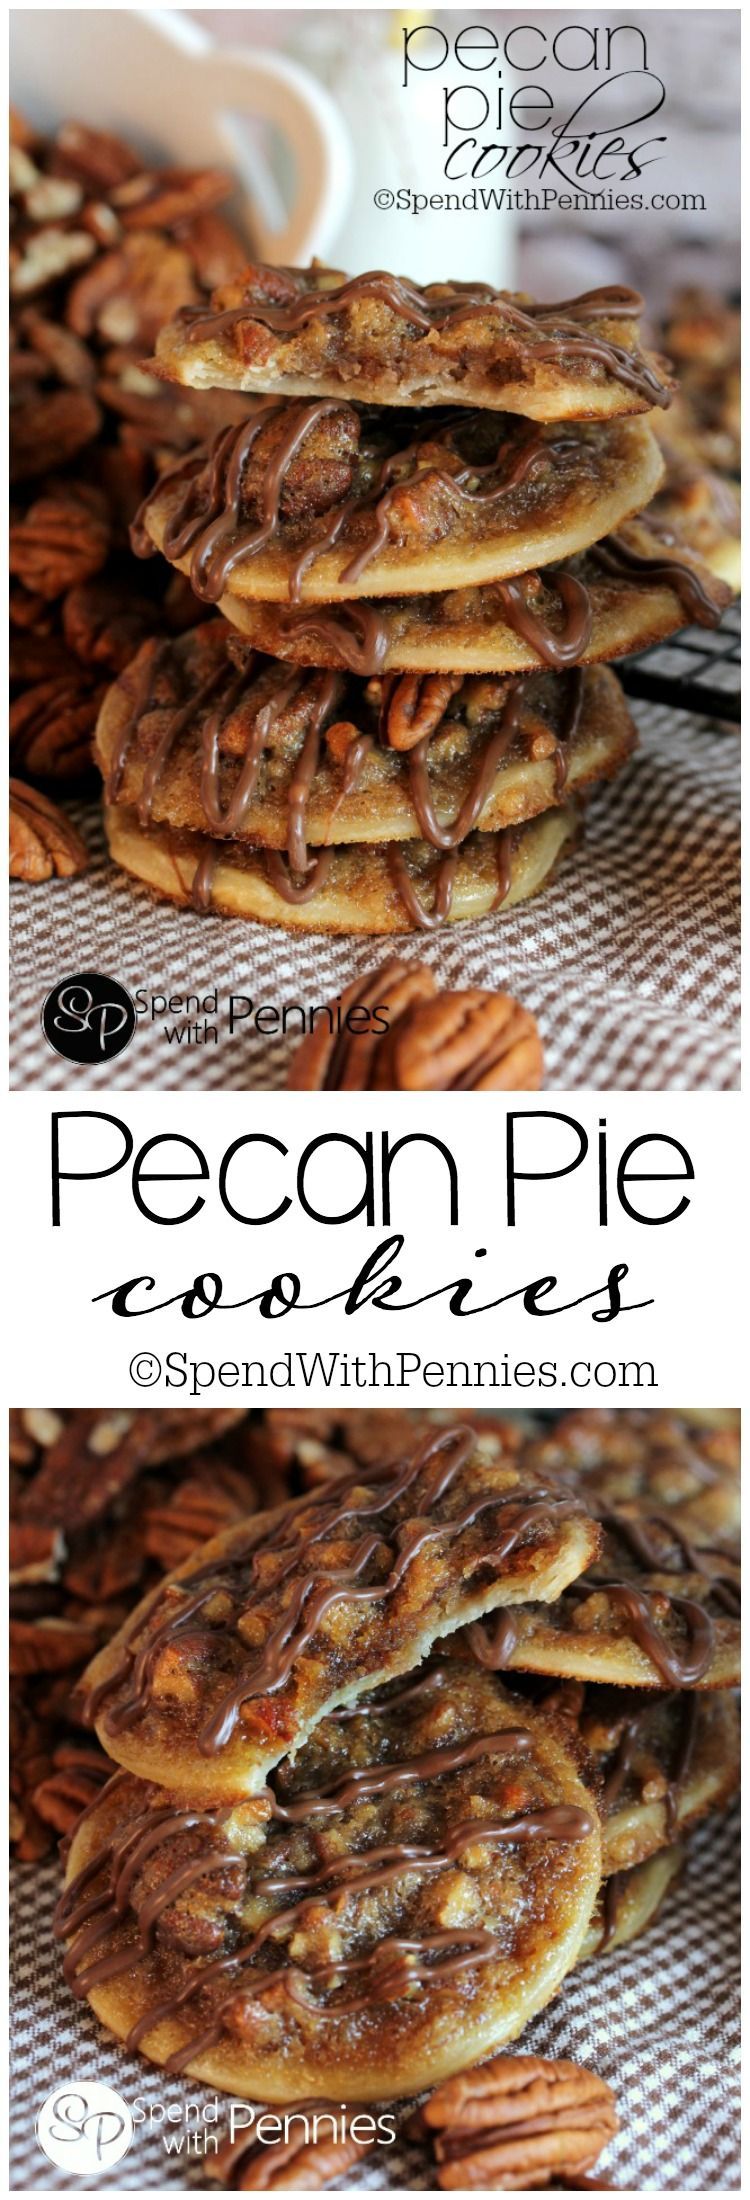 Pecan Pie Cookies! These have a deliciously sweet, caramel-y, nutty filling with a flaky pastry! Easy to make, easier to eat!